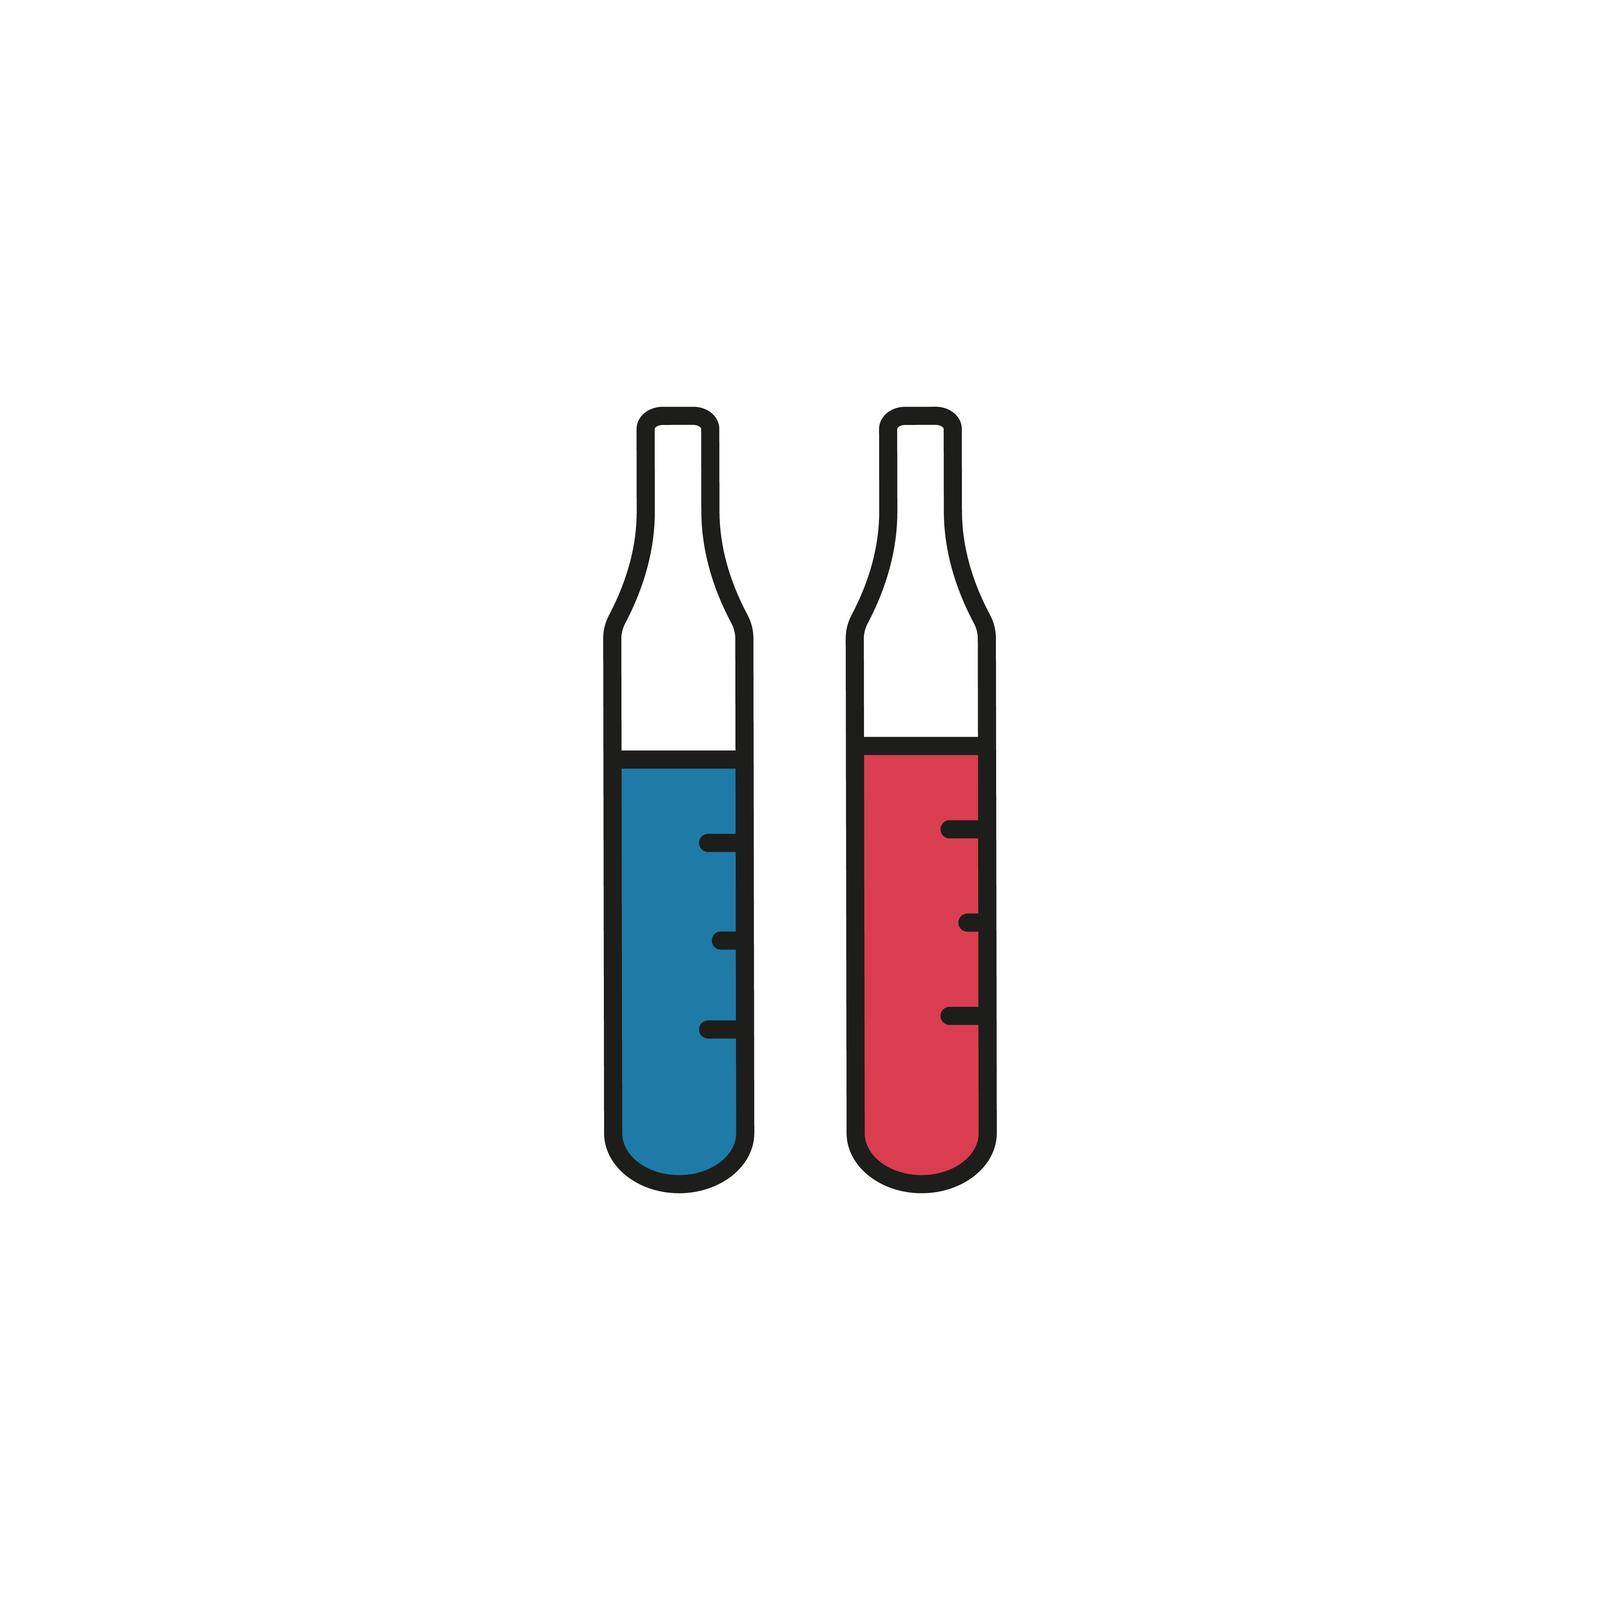 Glass test tubes line icon vector illustration. Glass laboratory container for experiments and analyses. Medical or scientific chemical equipment. Simple outline image pair of biochemical flasks